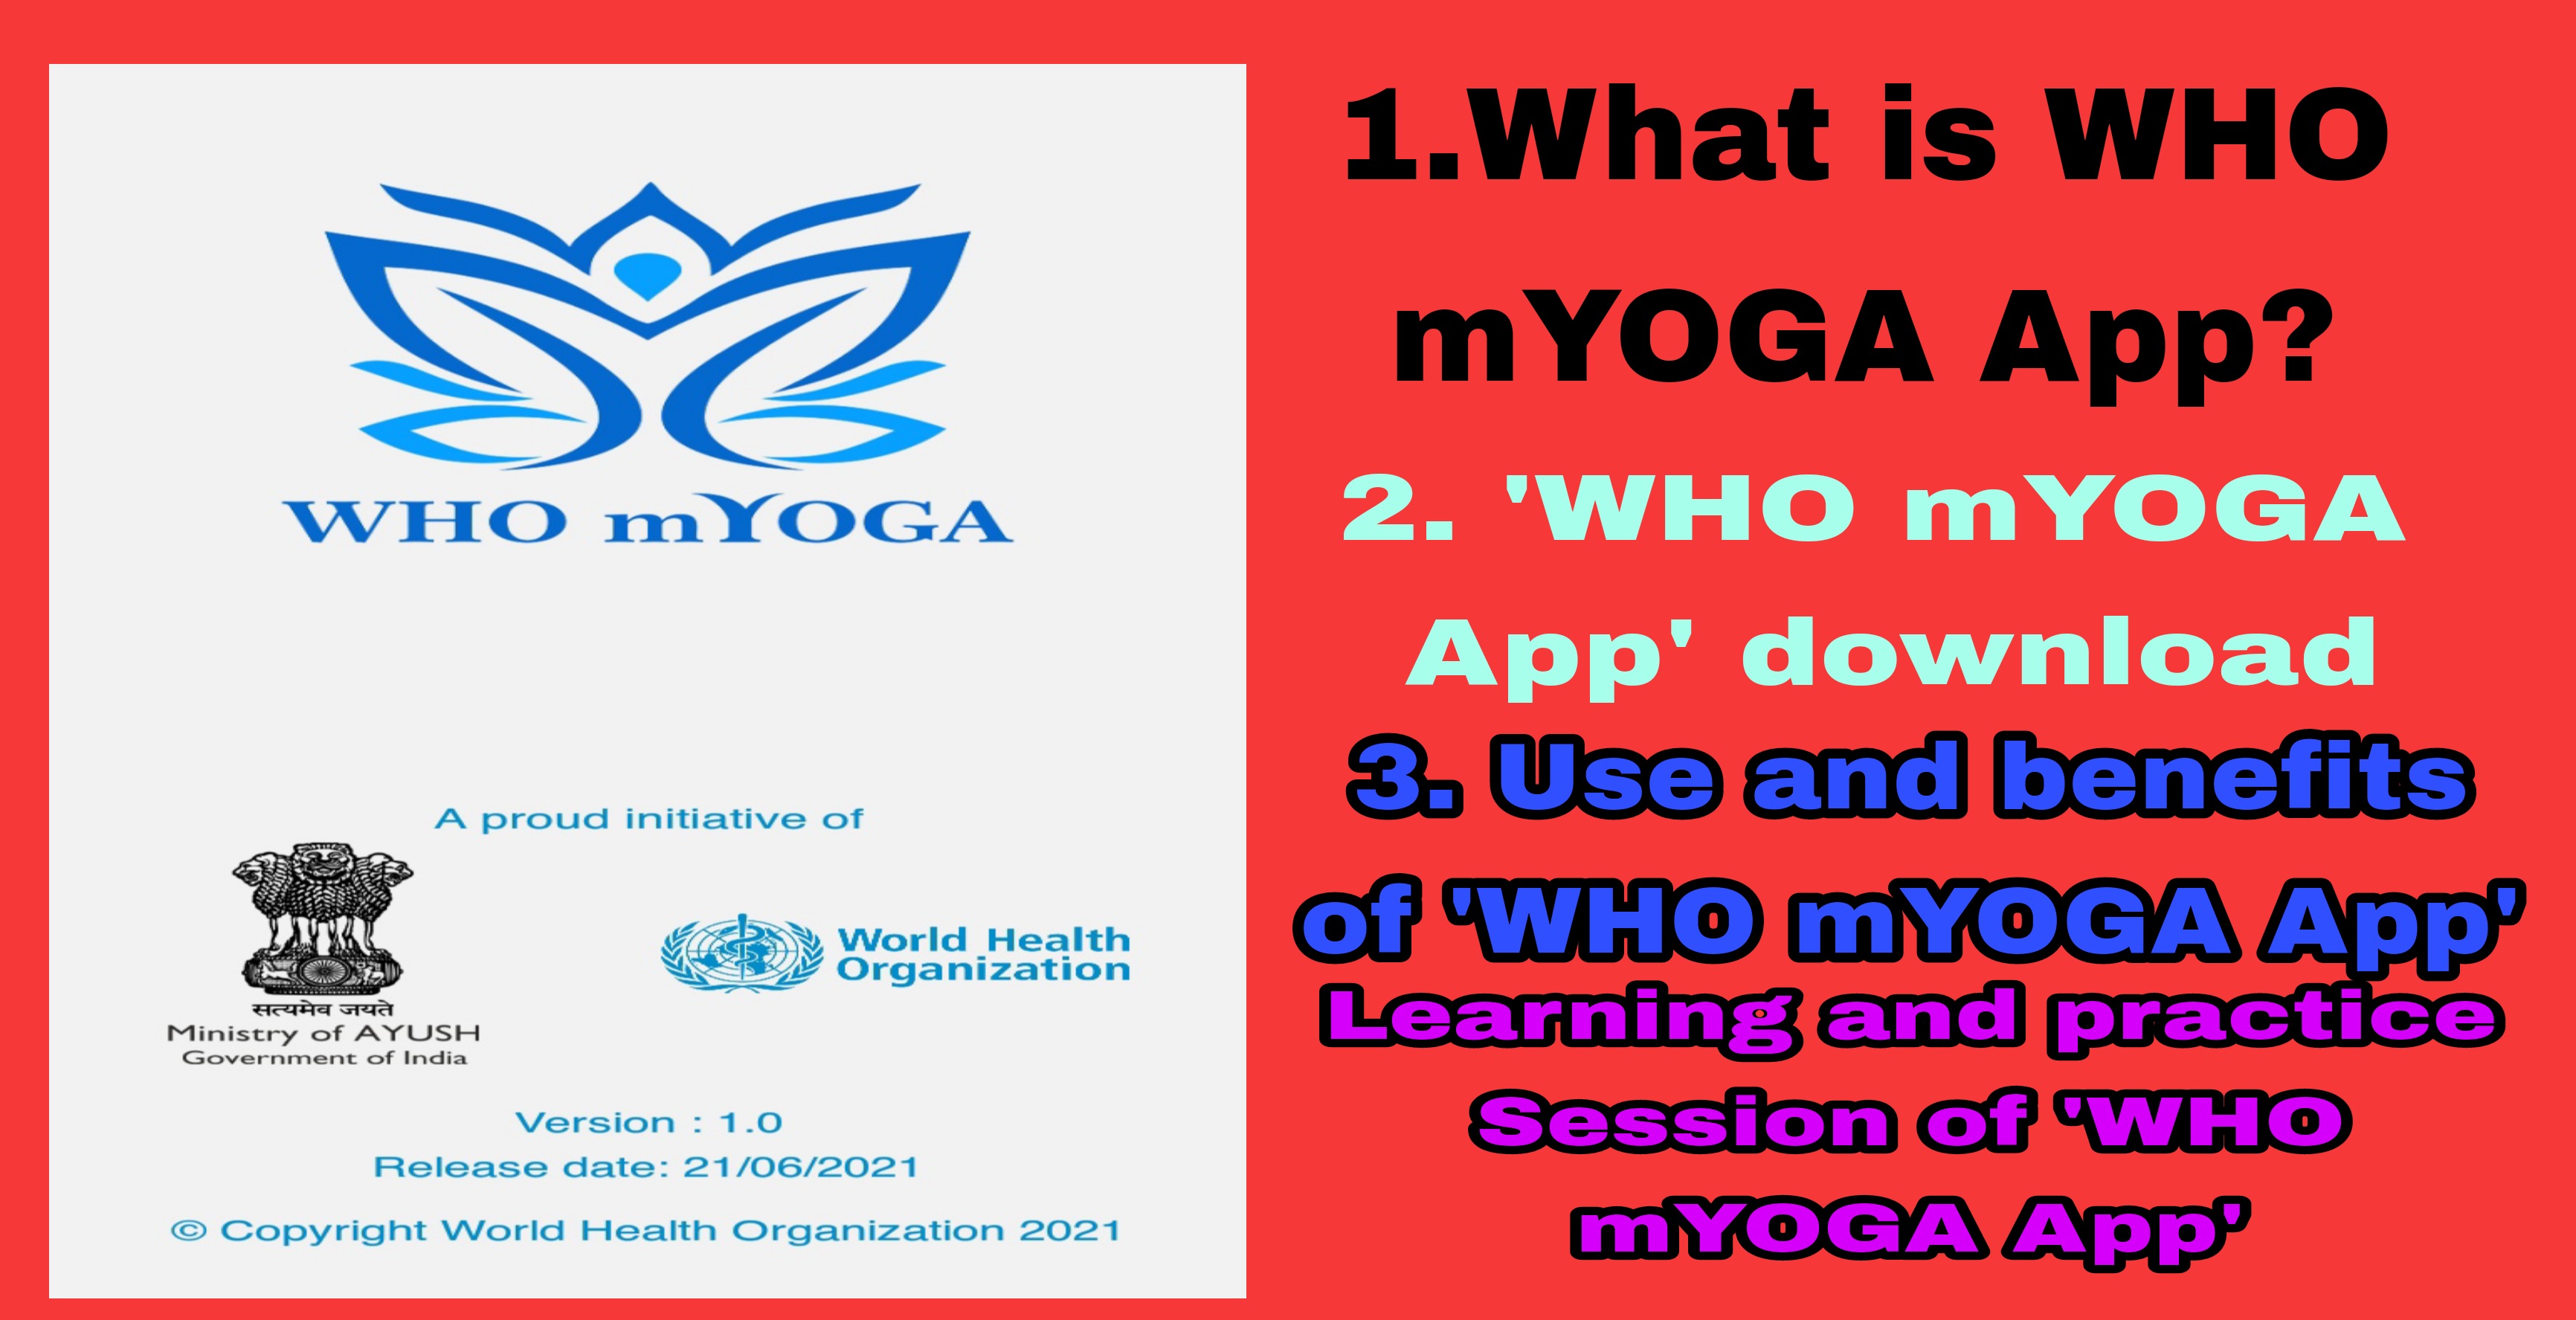 —

H&E

<__ __
WHO mYOGA 2. "WHO mYOGA
App' download

A proud initiative of

World Health
Organization

Ministry of AYUSH

Government of India

Version : 1.0
Release date: 21/06/2021

© Copyright World Health Organization 2021